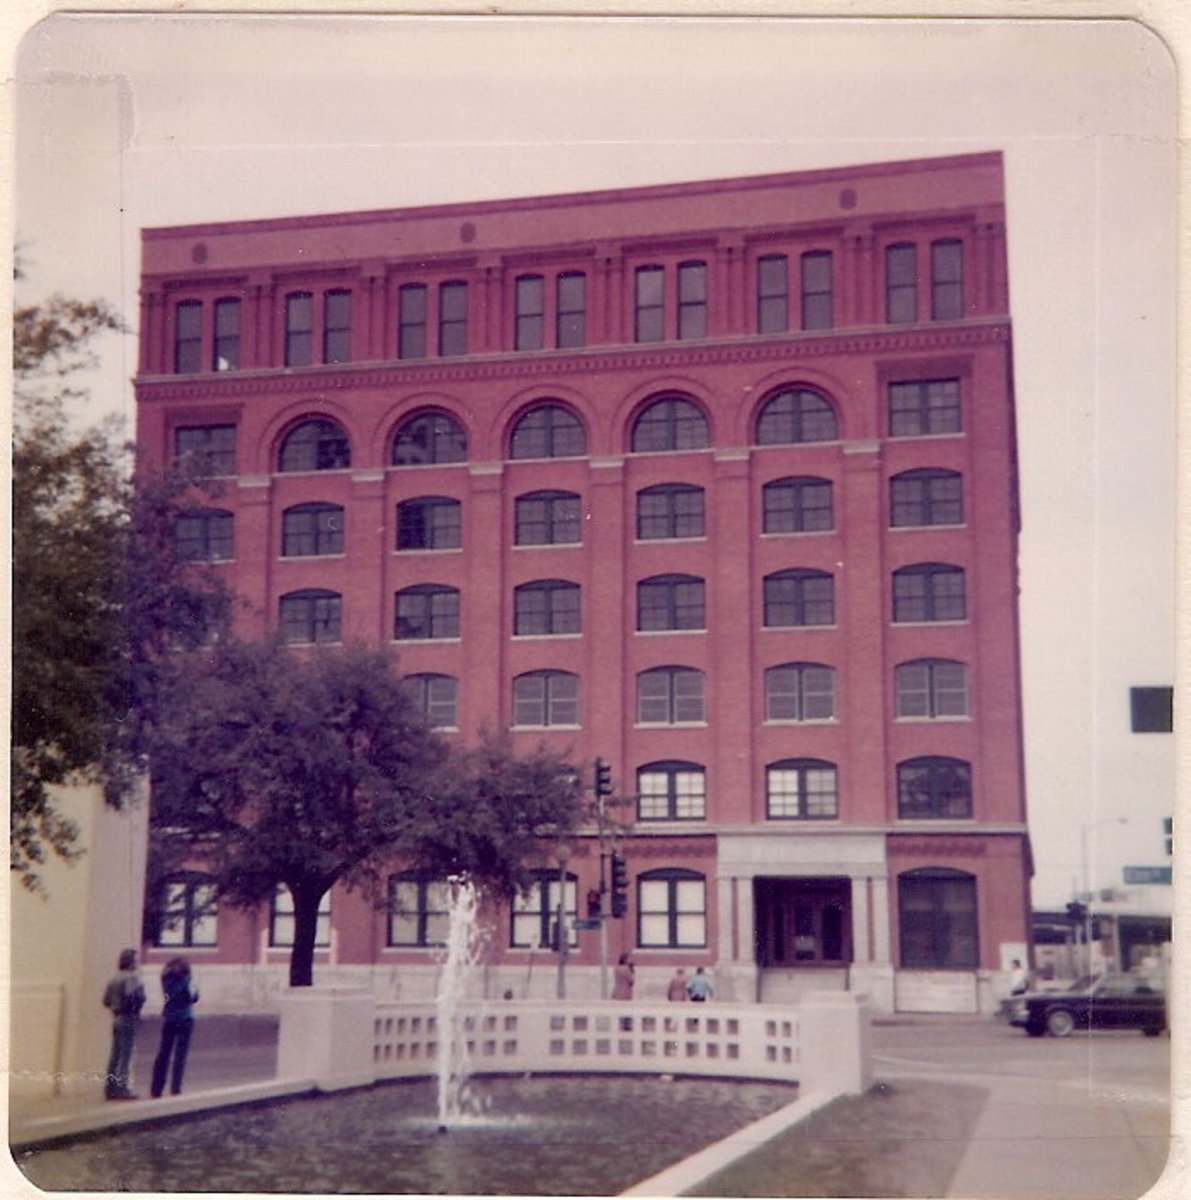 The infamous Book Depository where Lee Harvey Oswald fired the shots that assassinated President John F. Kennedy.  